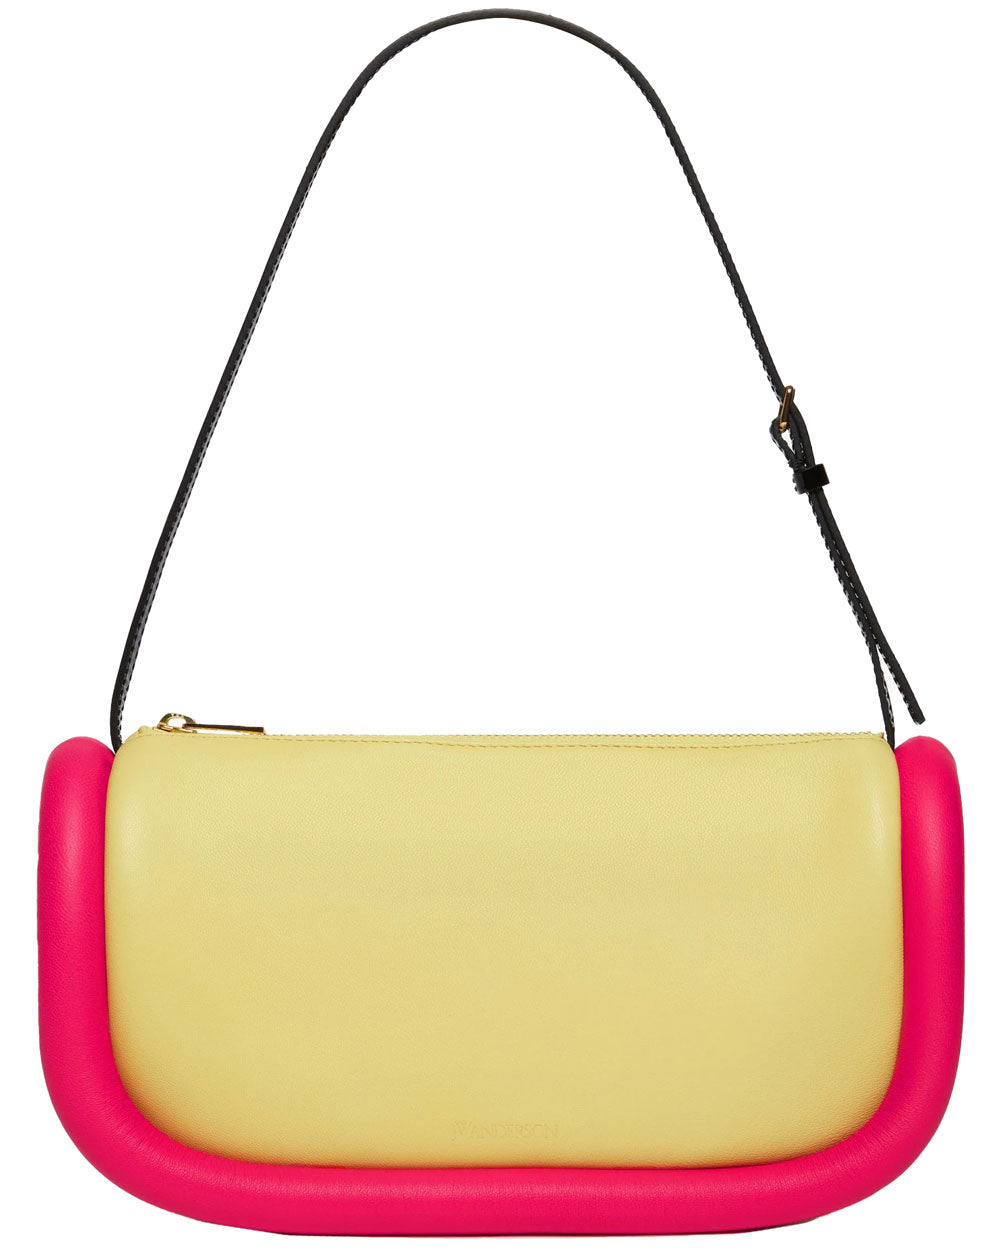 The Bumper Baguette in Yellow and Pink